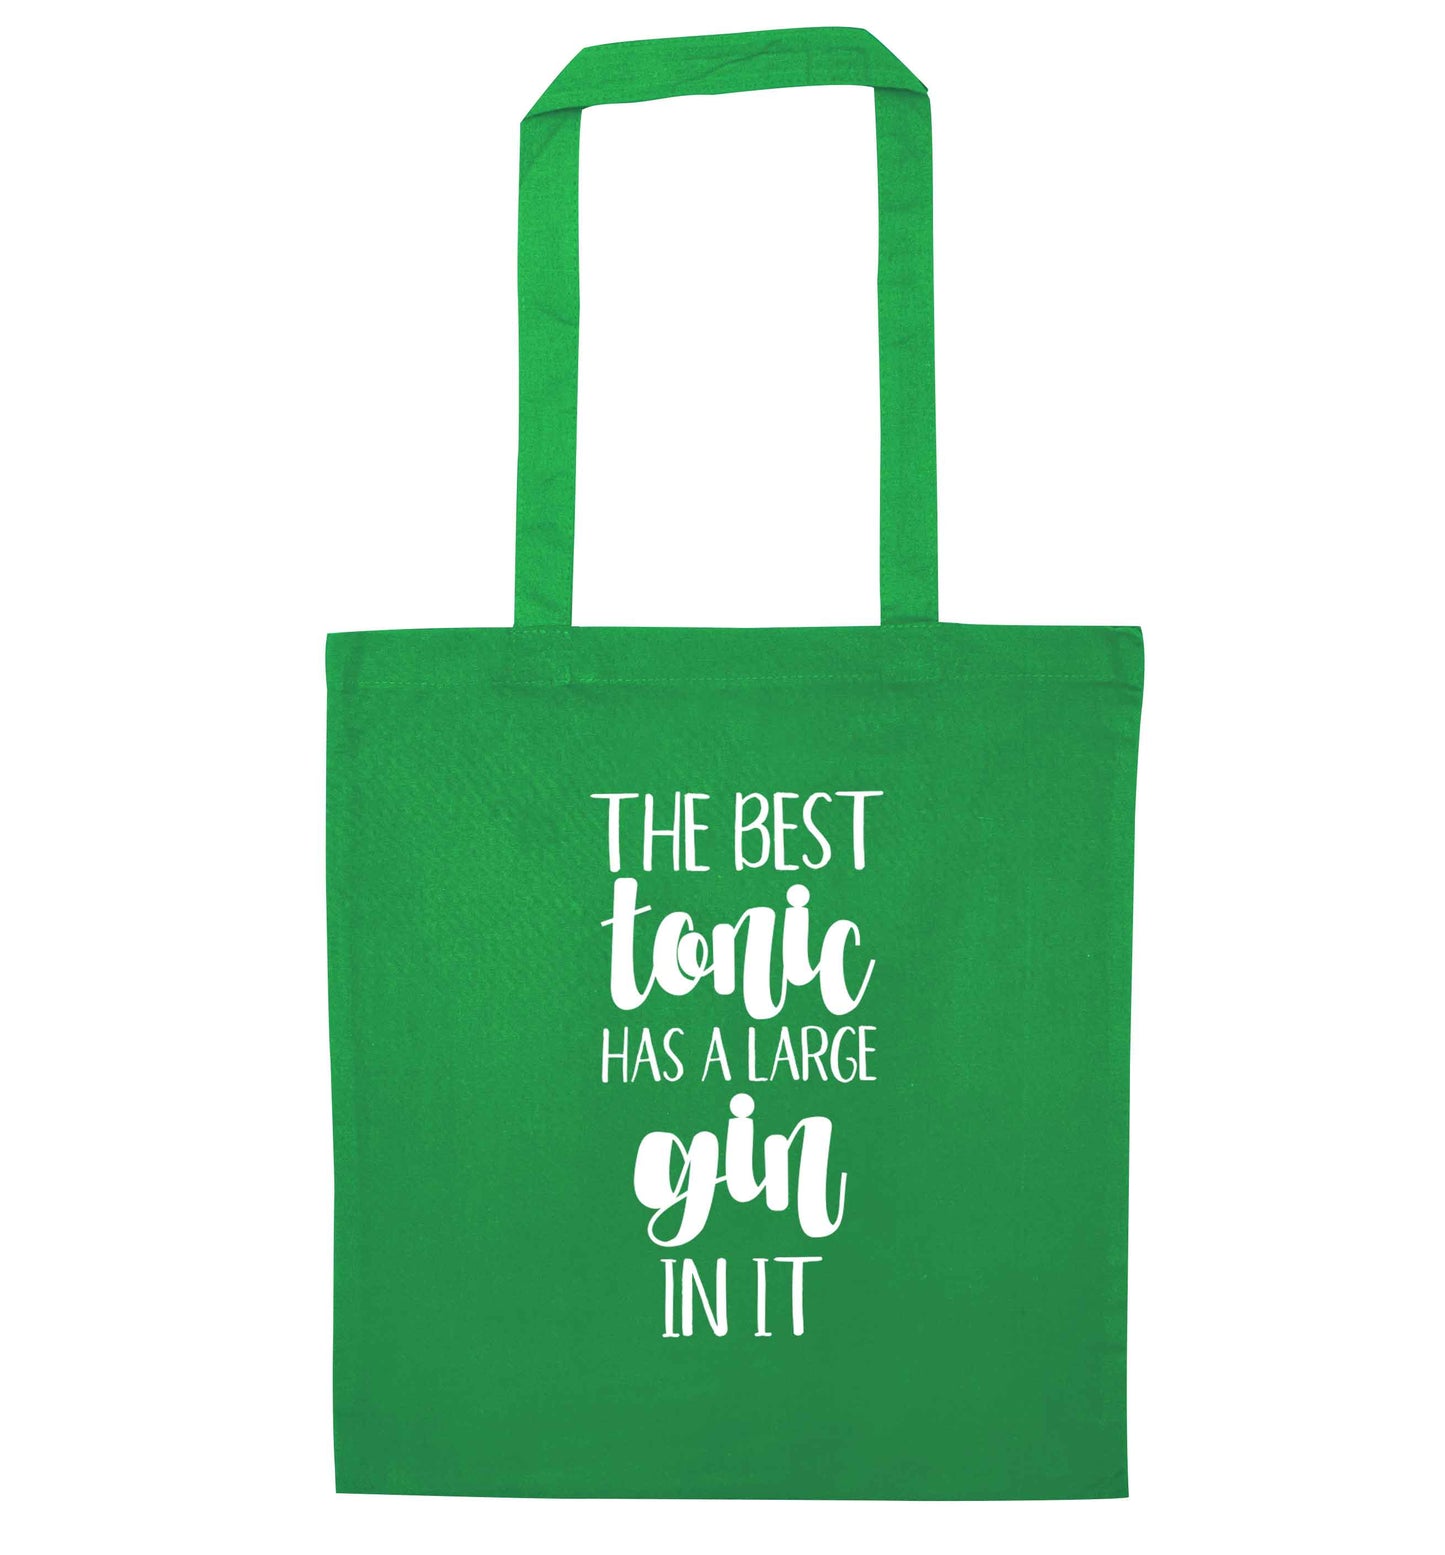 The best tonic has a large gin in it green tote bag